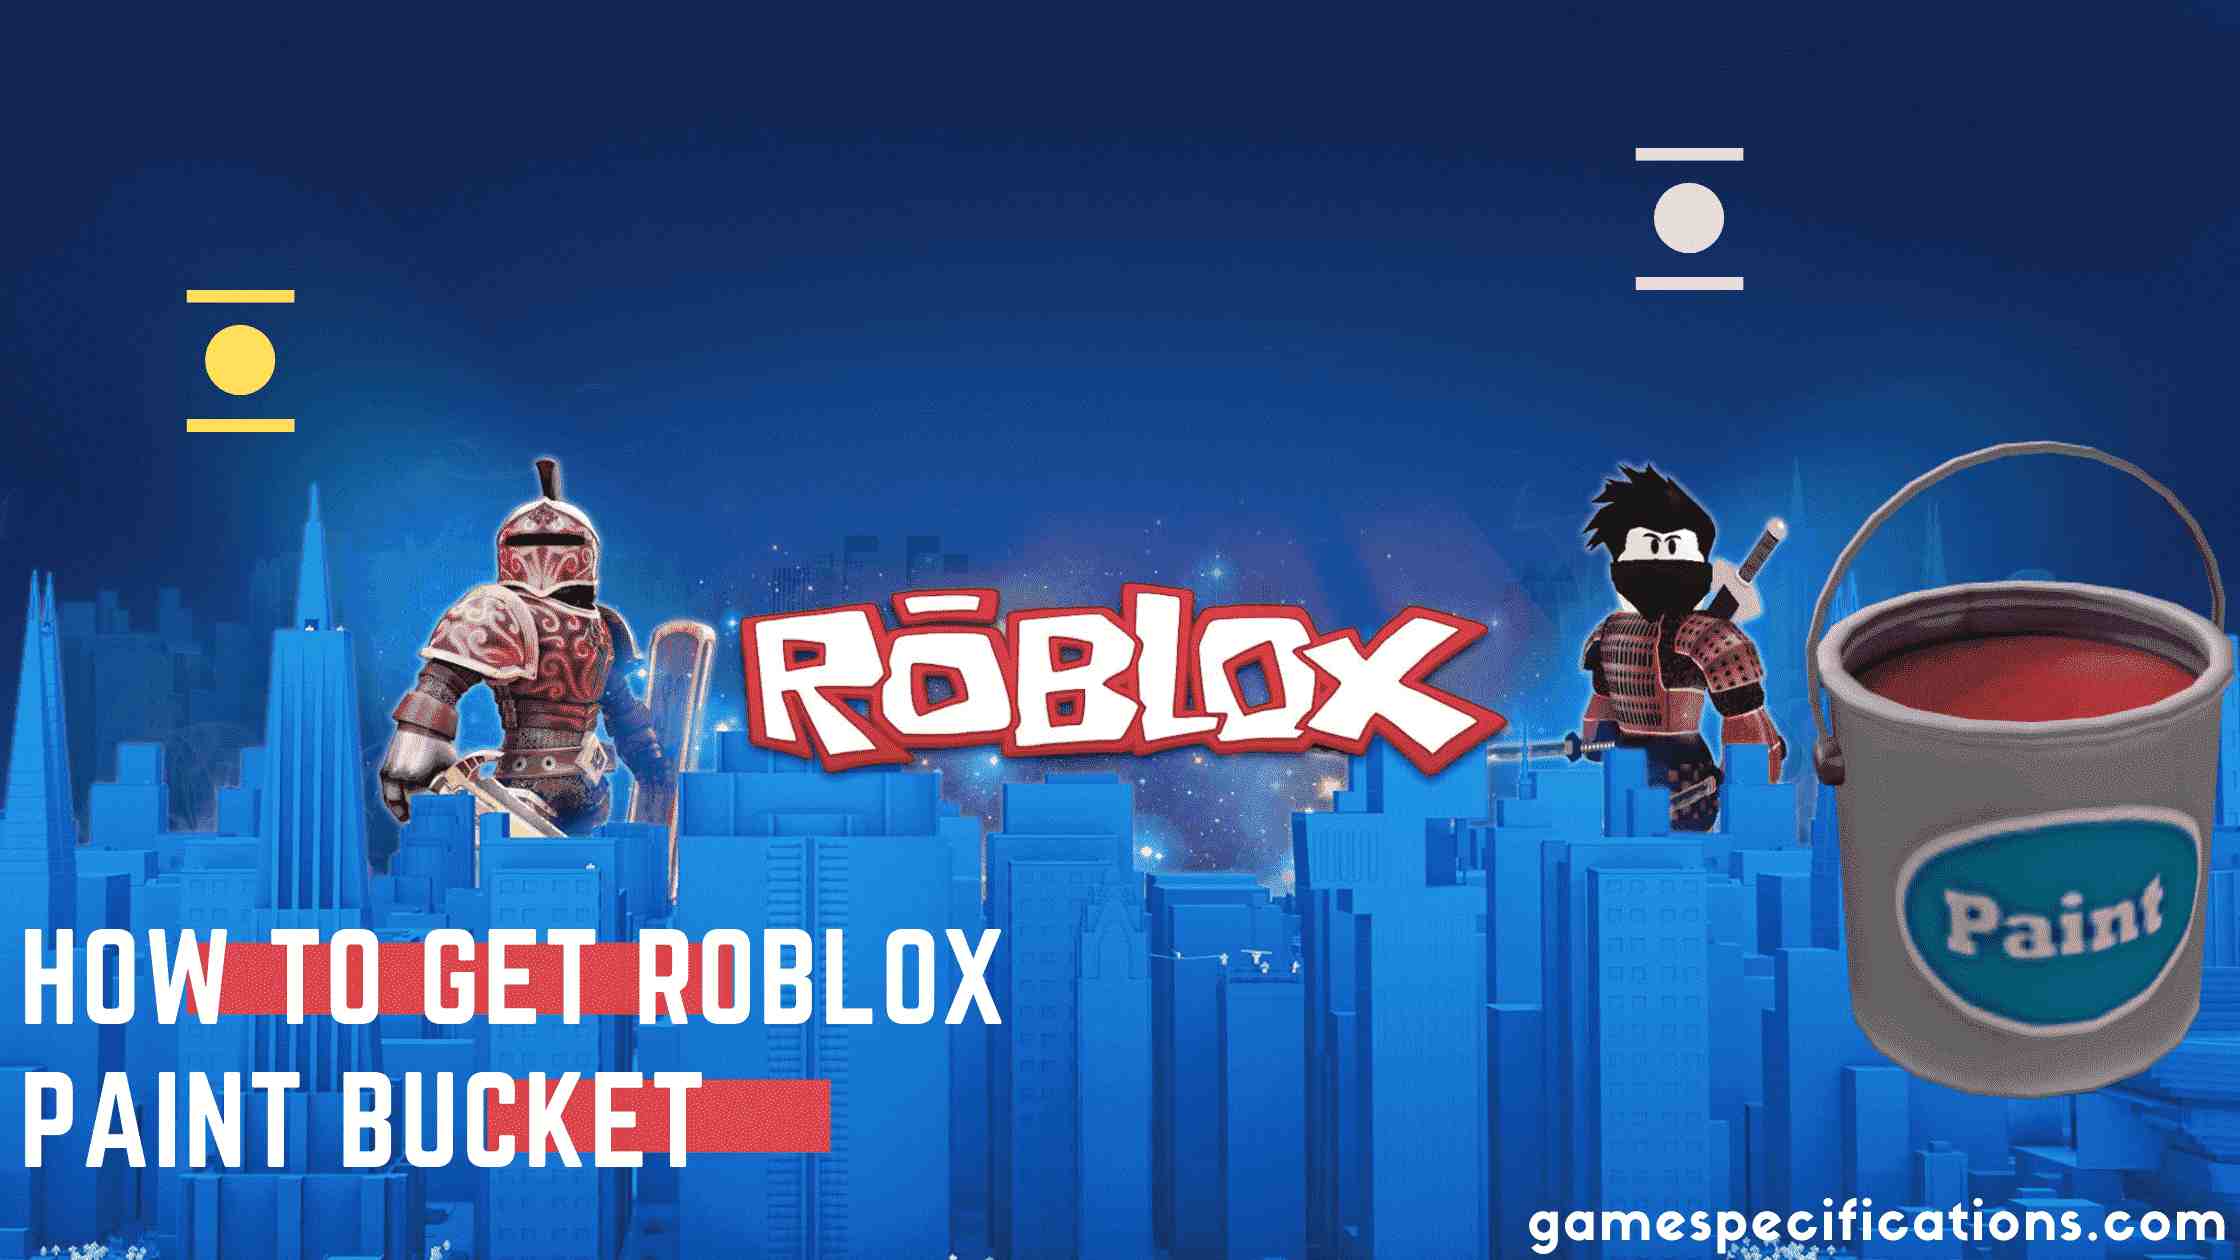 Roblox Paint Bucket Issue Solved 100 Success Rate Codes Included Game Specifications - roblox error code 247